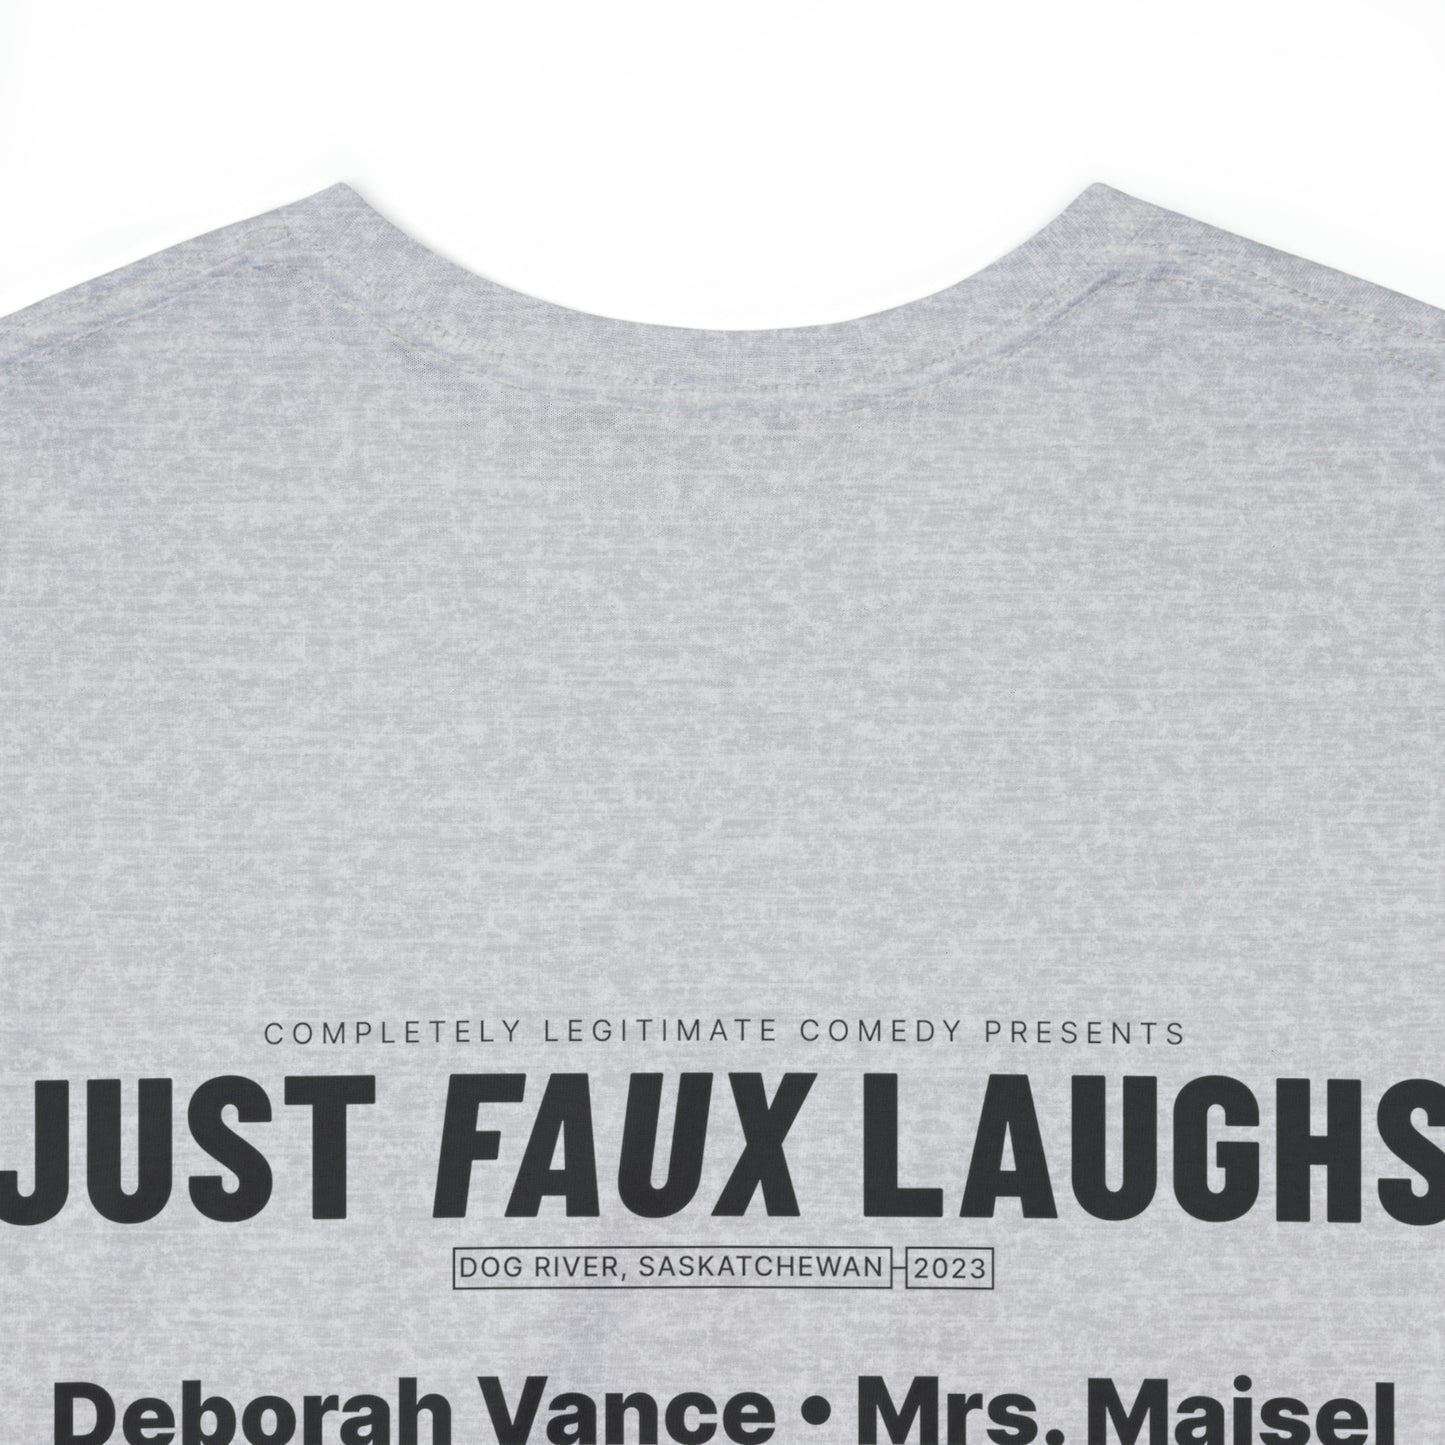 Just Faux Laughs 2023 - Fake Comedy Festival T-shirt